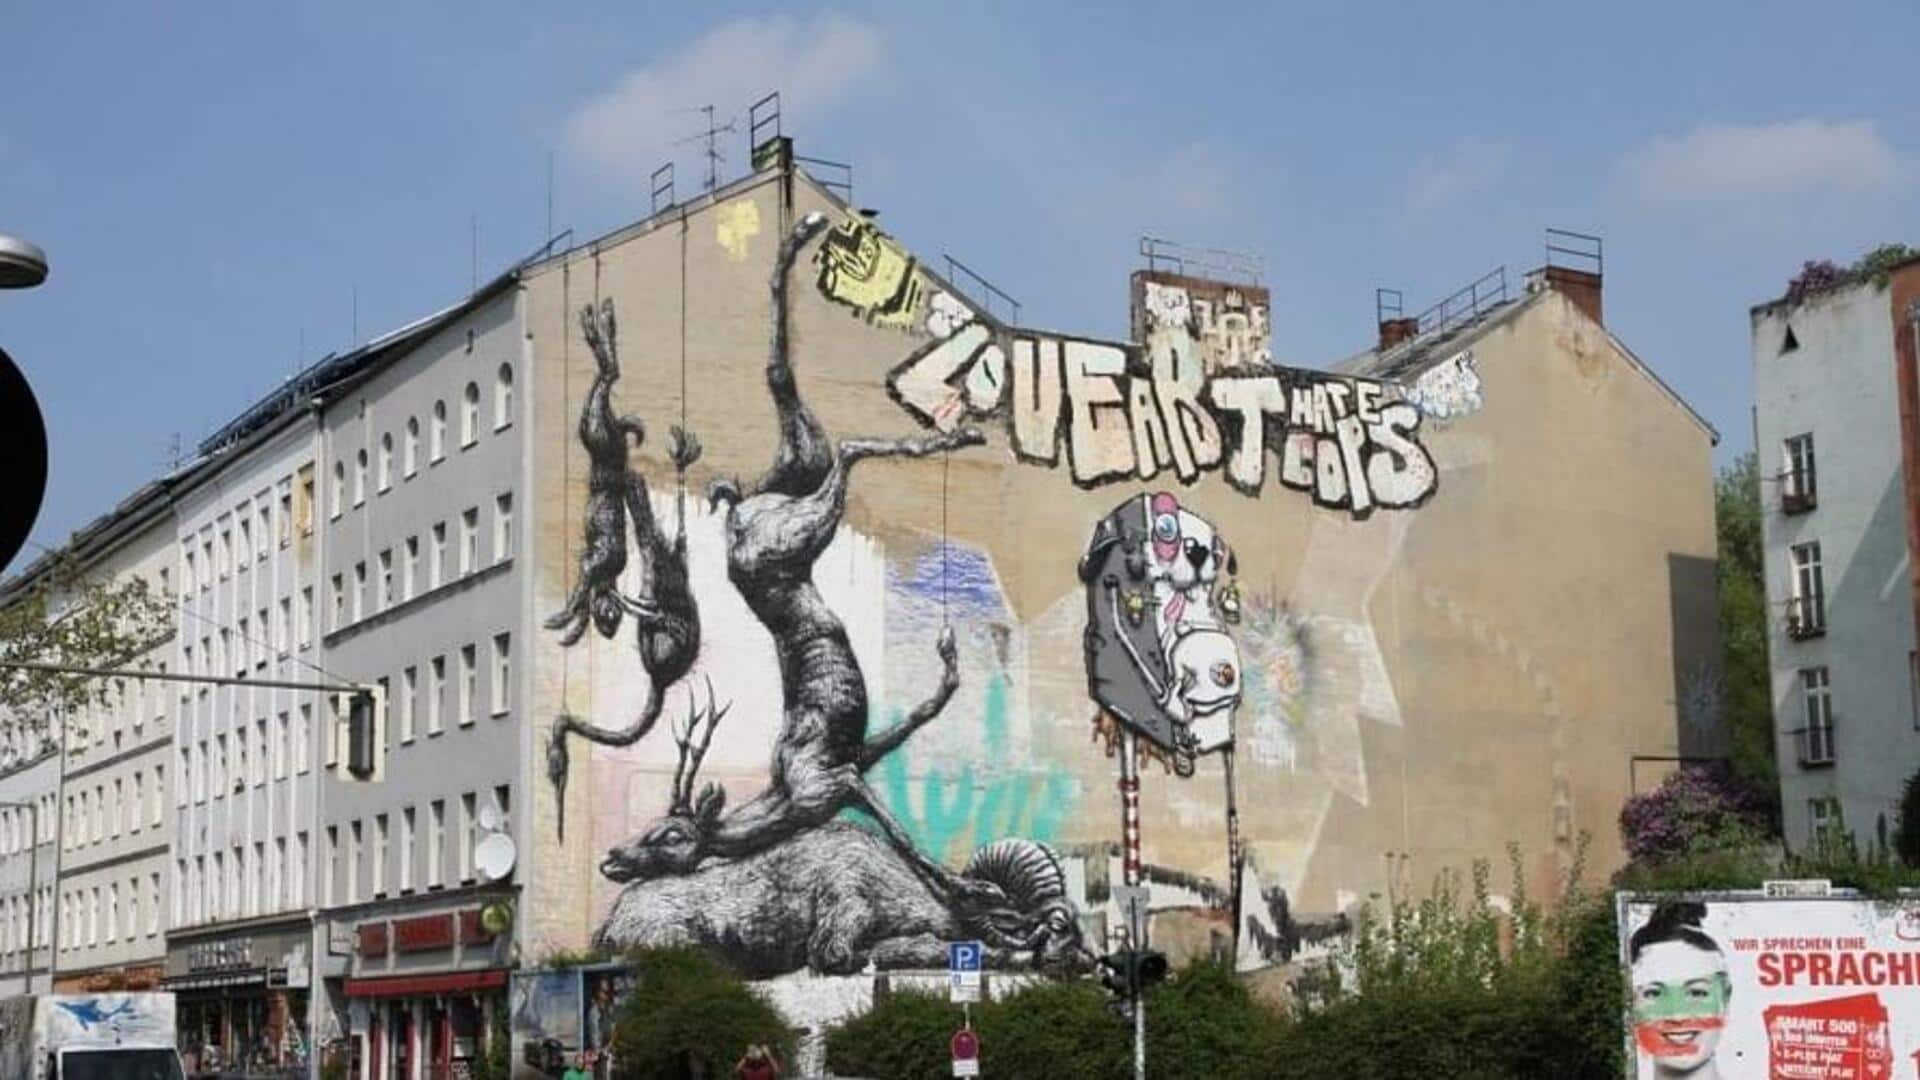 Explore urban art in Berlin, Germany with these recommendations